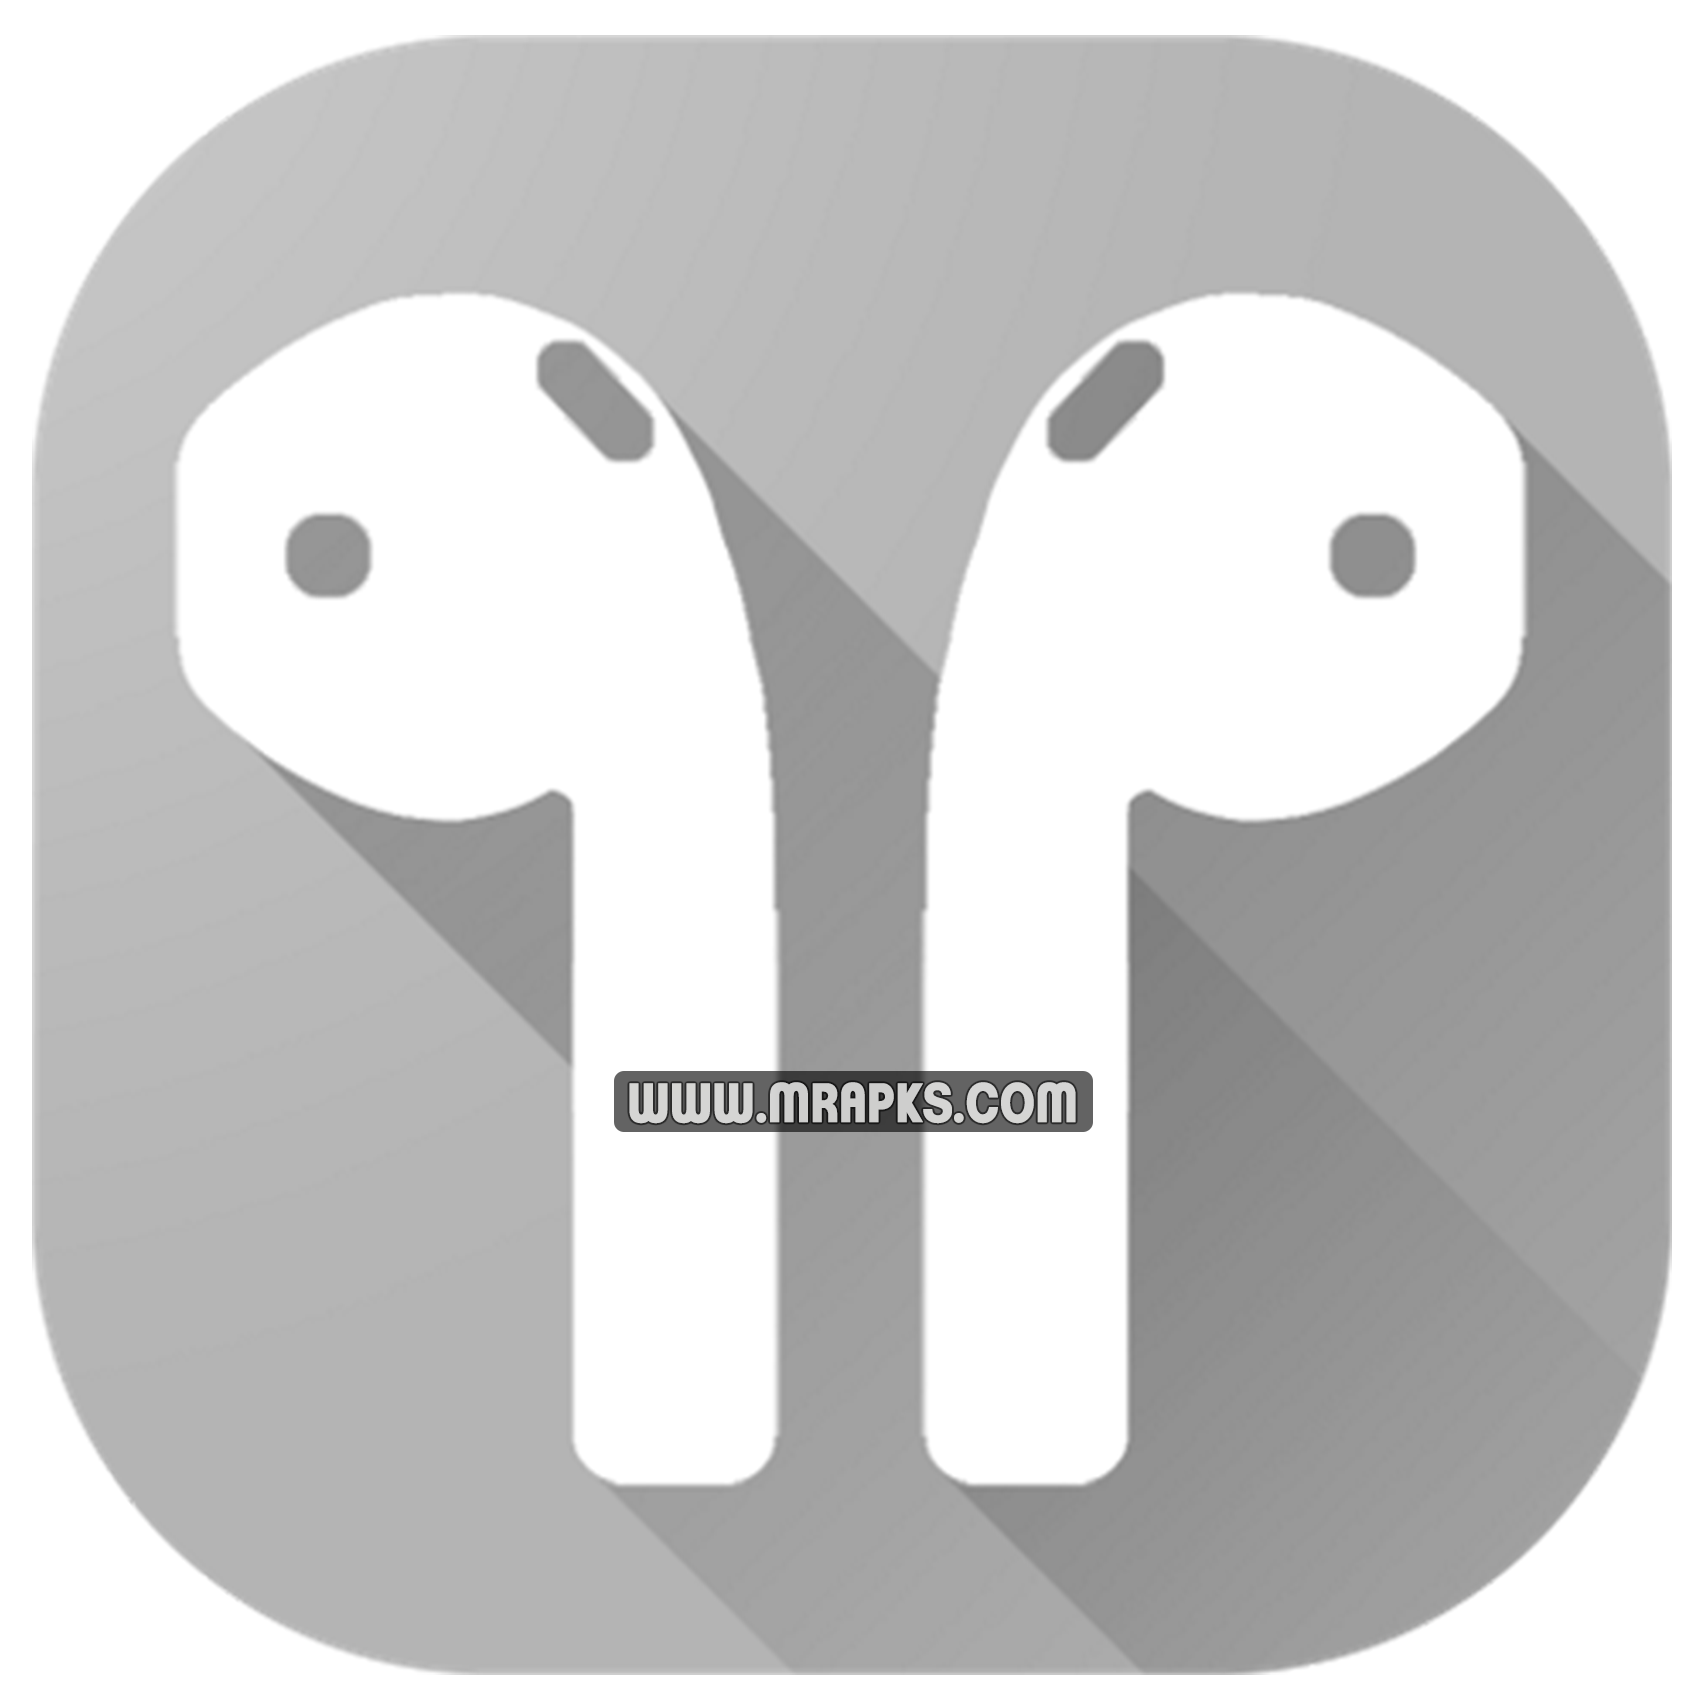 AirBuds Popup – airpod battery app v2.7.210322 (Full) (Paid) APK